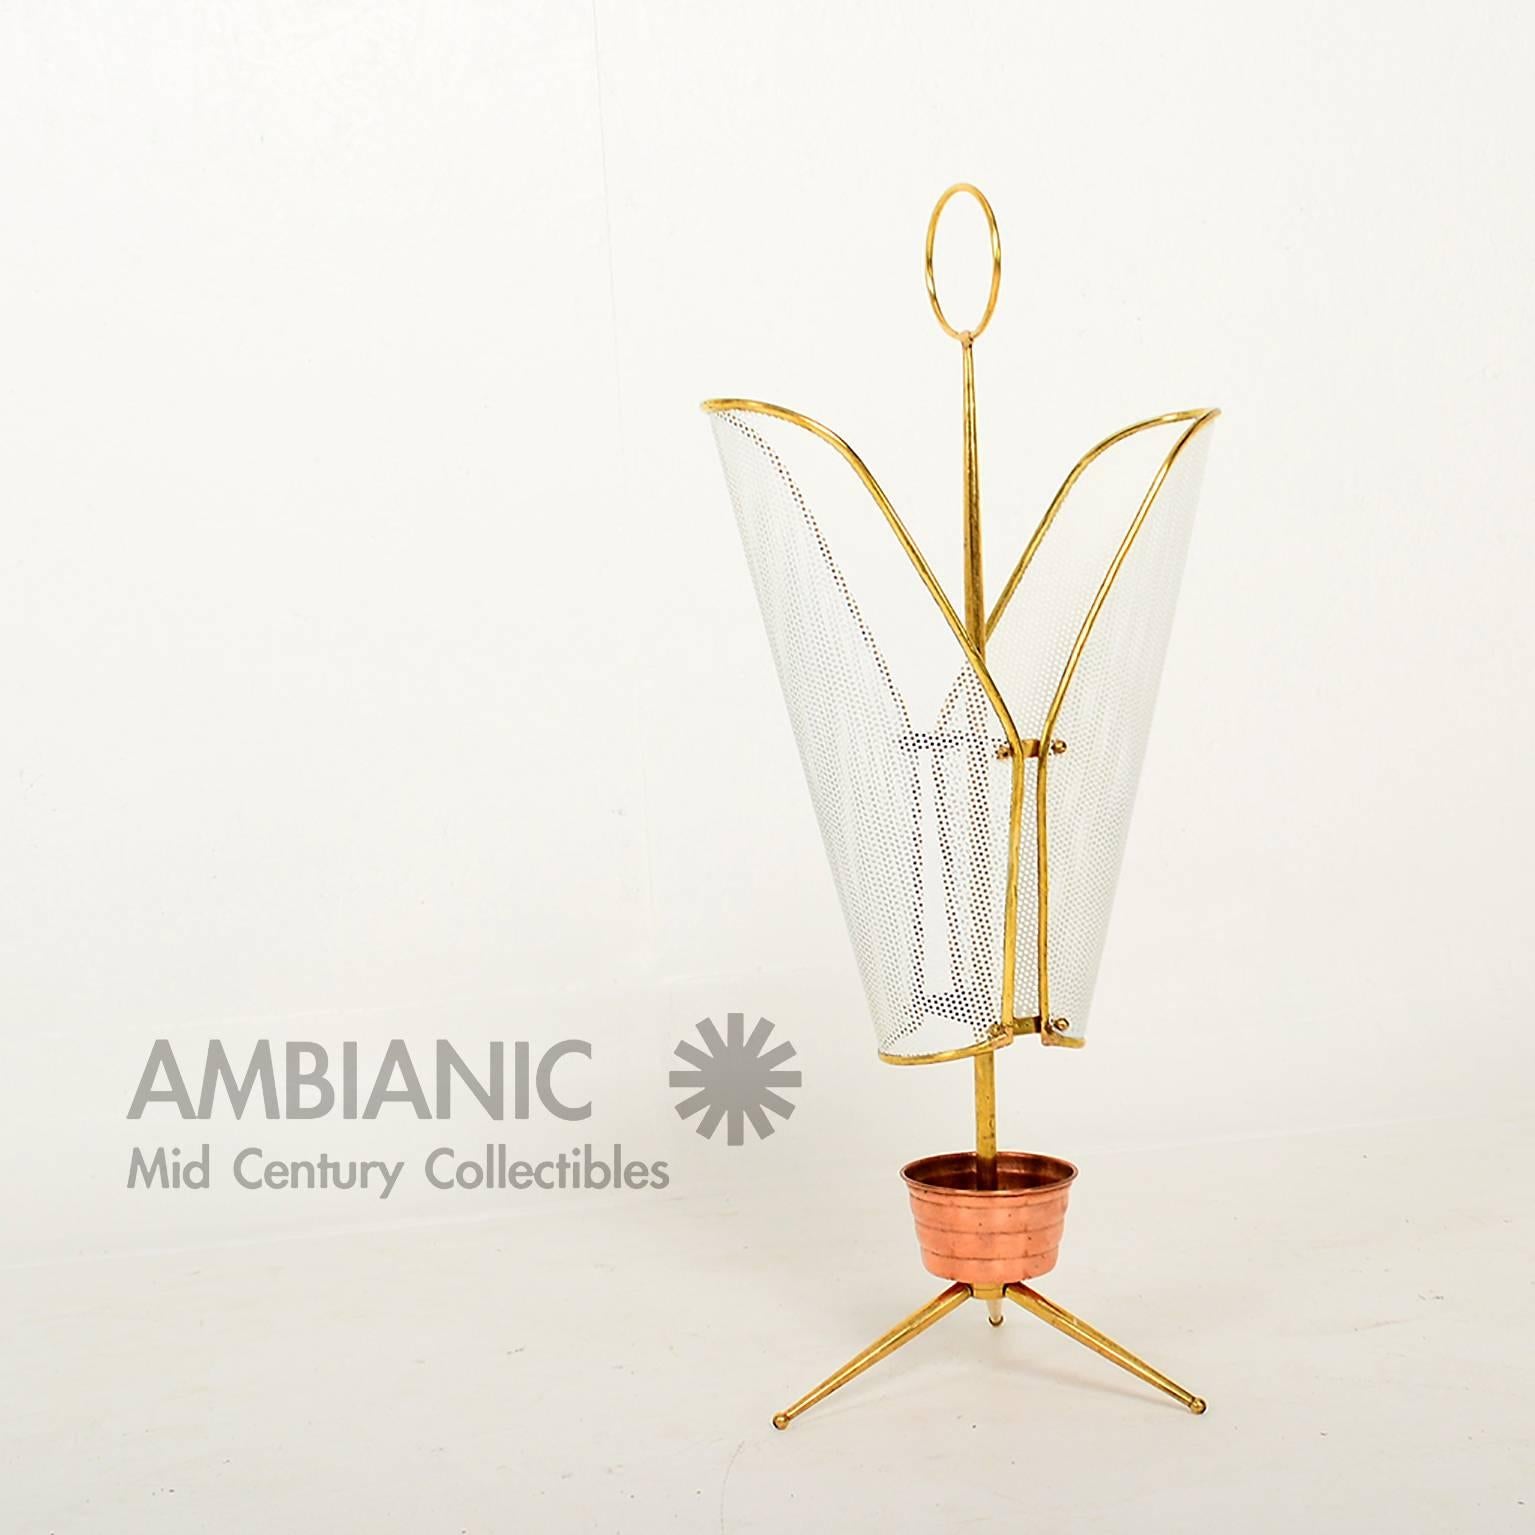 For your consideration mid century modern Italian umbrella holder.
Design after Mathieu Mategot with perforated metal , brass and copper. 

Constructed with perforated metal painted in white. Solid brass frame and copper holder.

DIMENSIONS
27